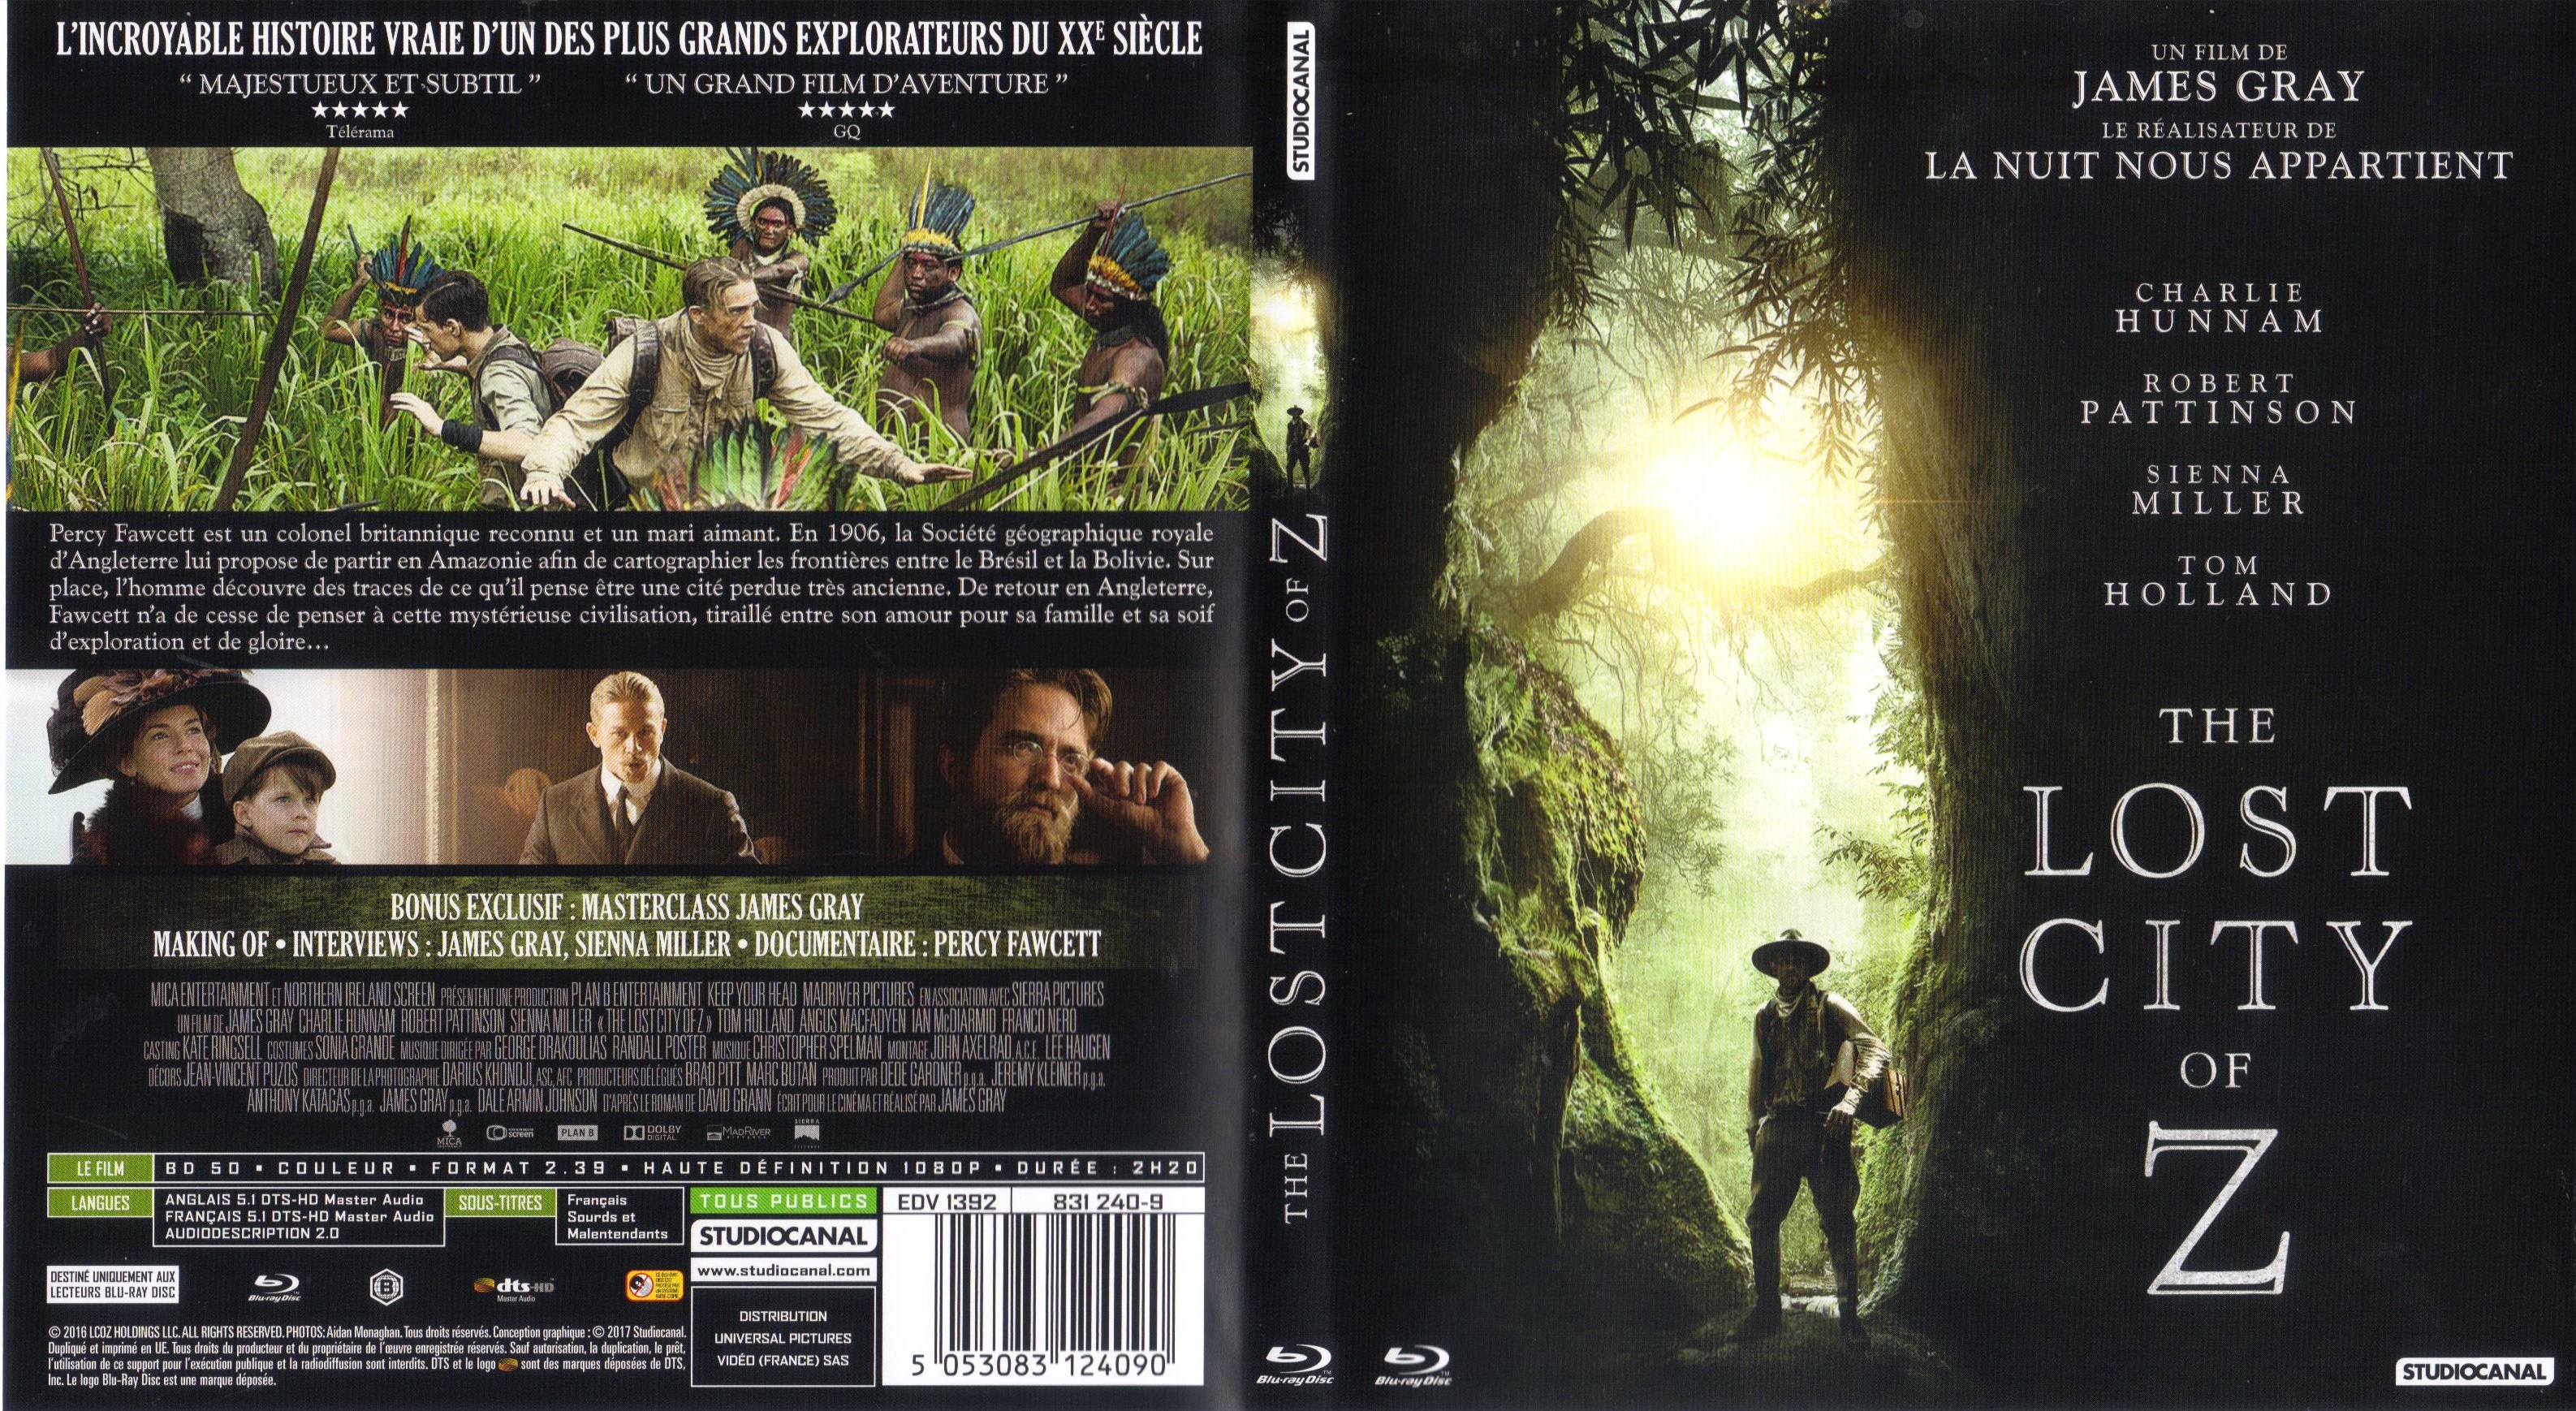 Jaquette DVD The Lost City of Z (BLU-RAY)